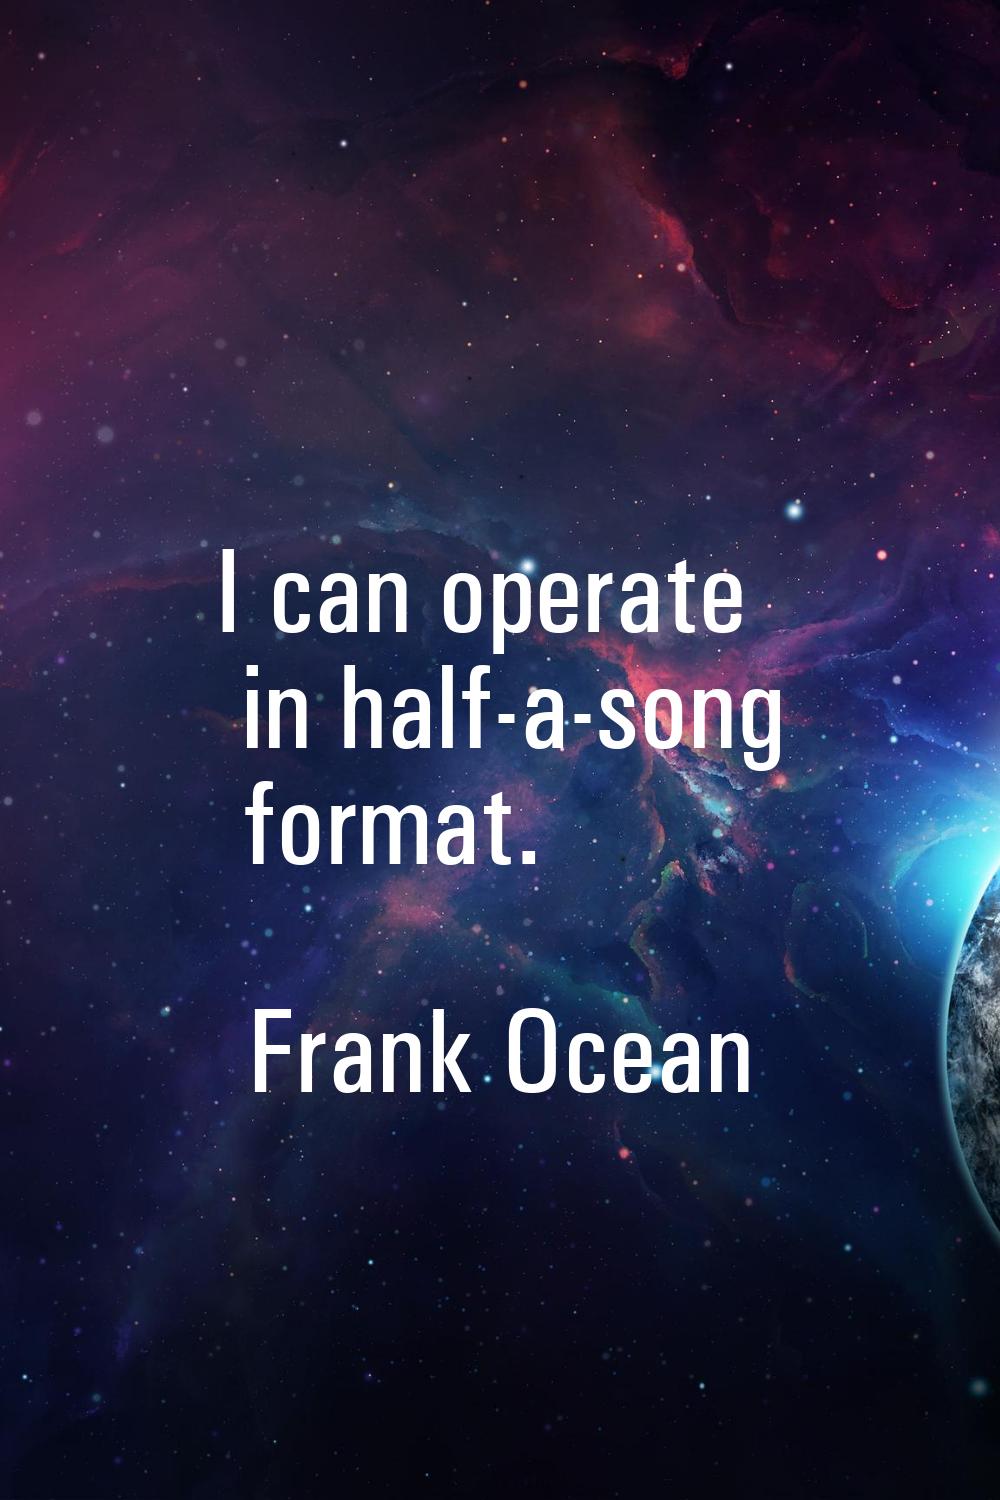 I can operate in half-a-song format.